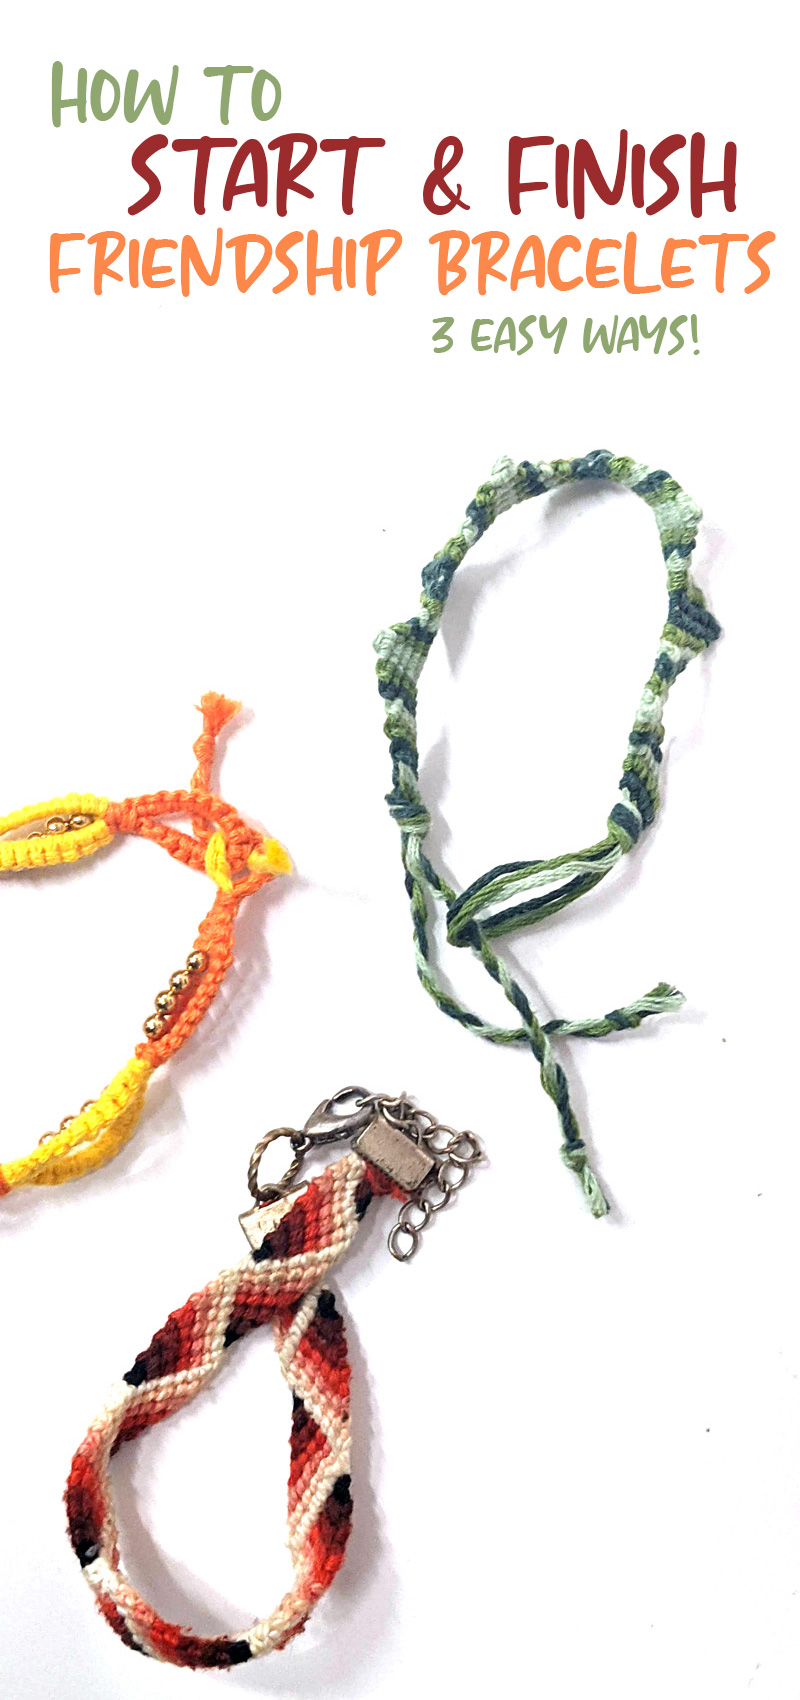 Friendship Bracelets: How They Started & How to Make Them